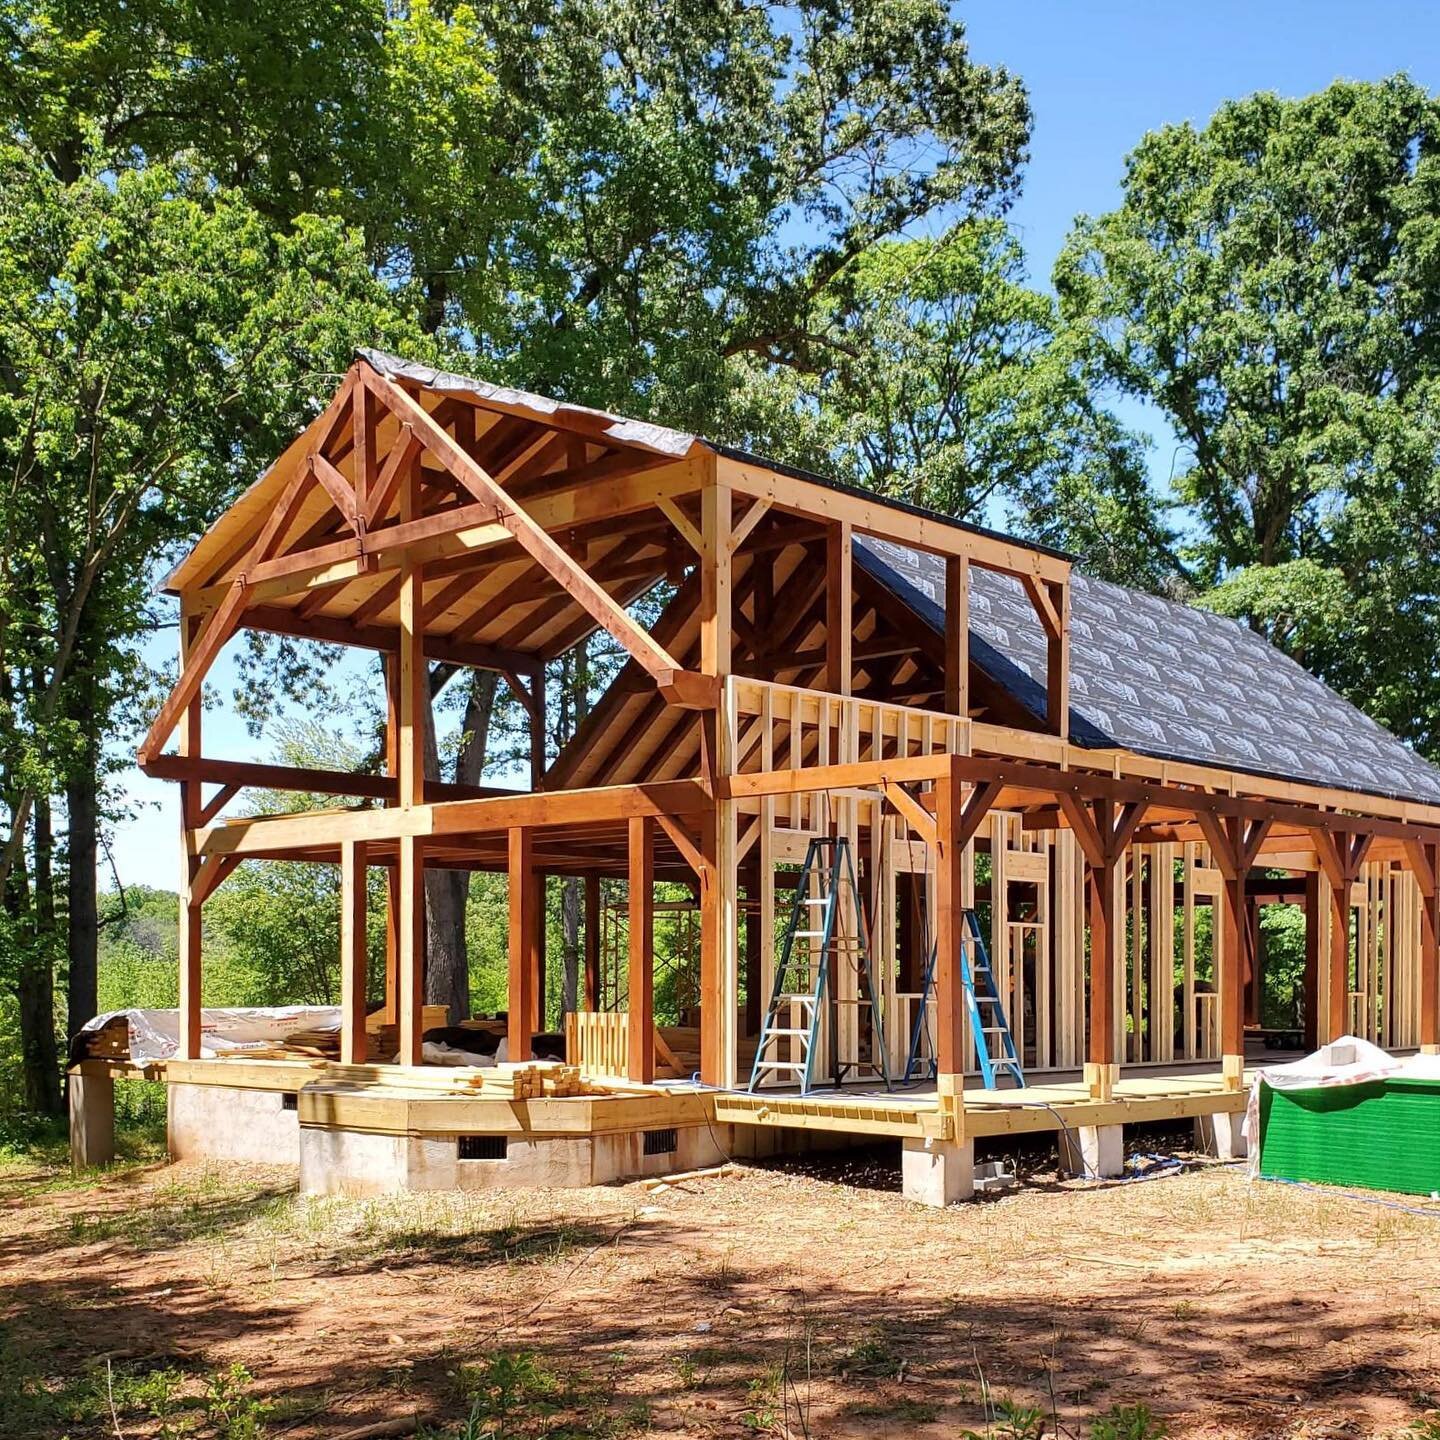 Picture perfect! 👌🏻 We love seeing the progress made on one of our timber frame projects in NC!  #timberframe #timberframehomes #loghome #engineeredlogs  #northcarolina